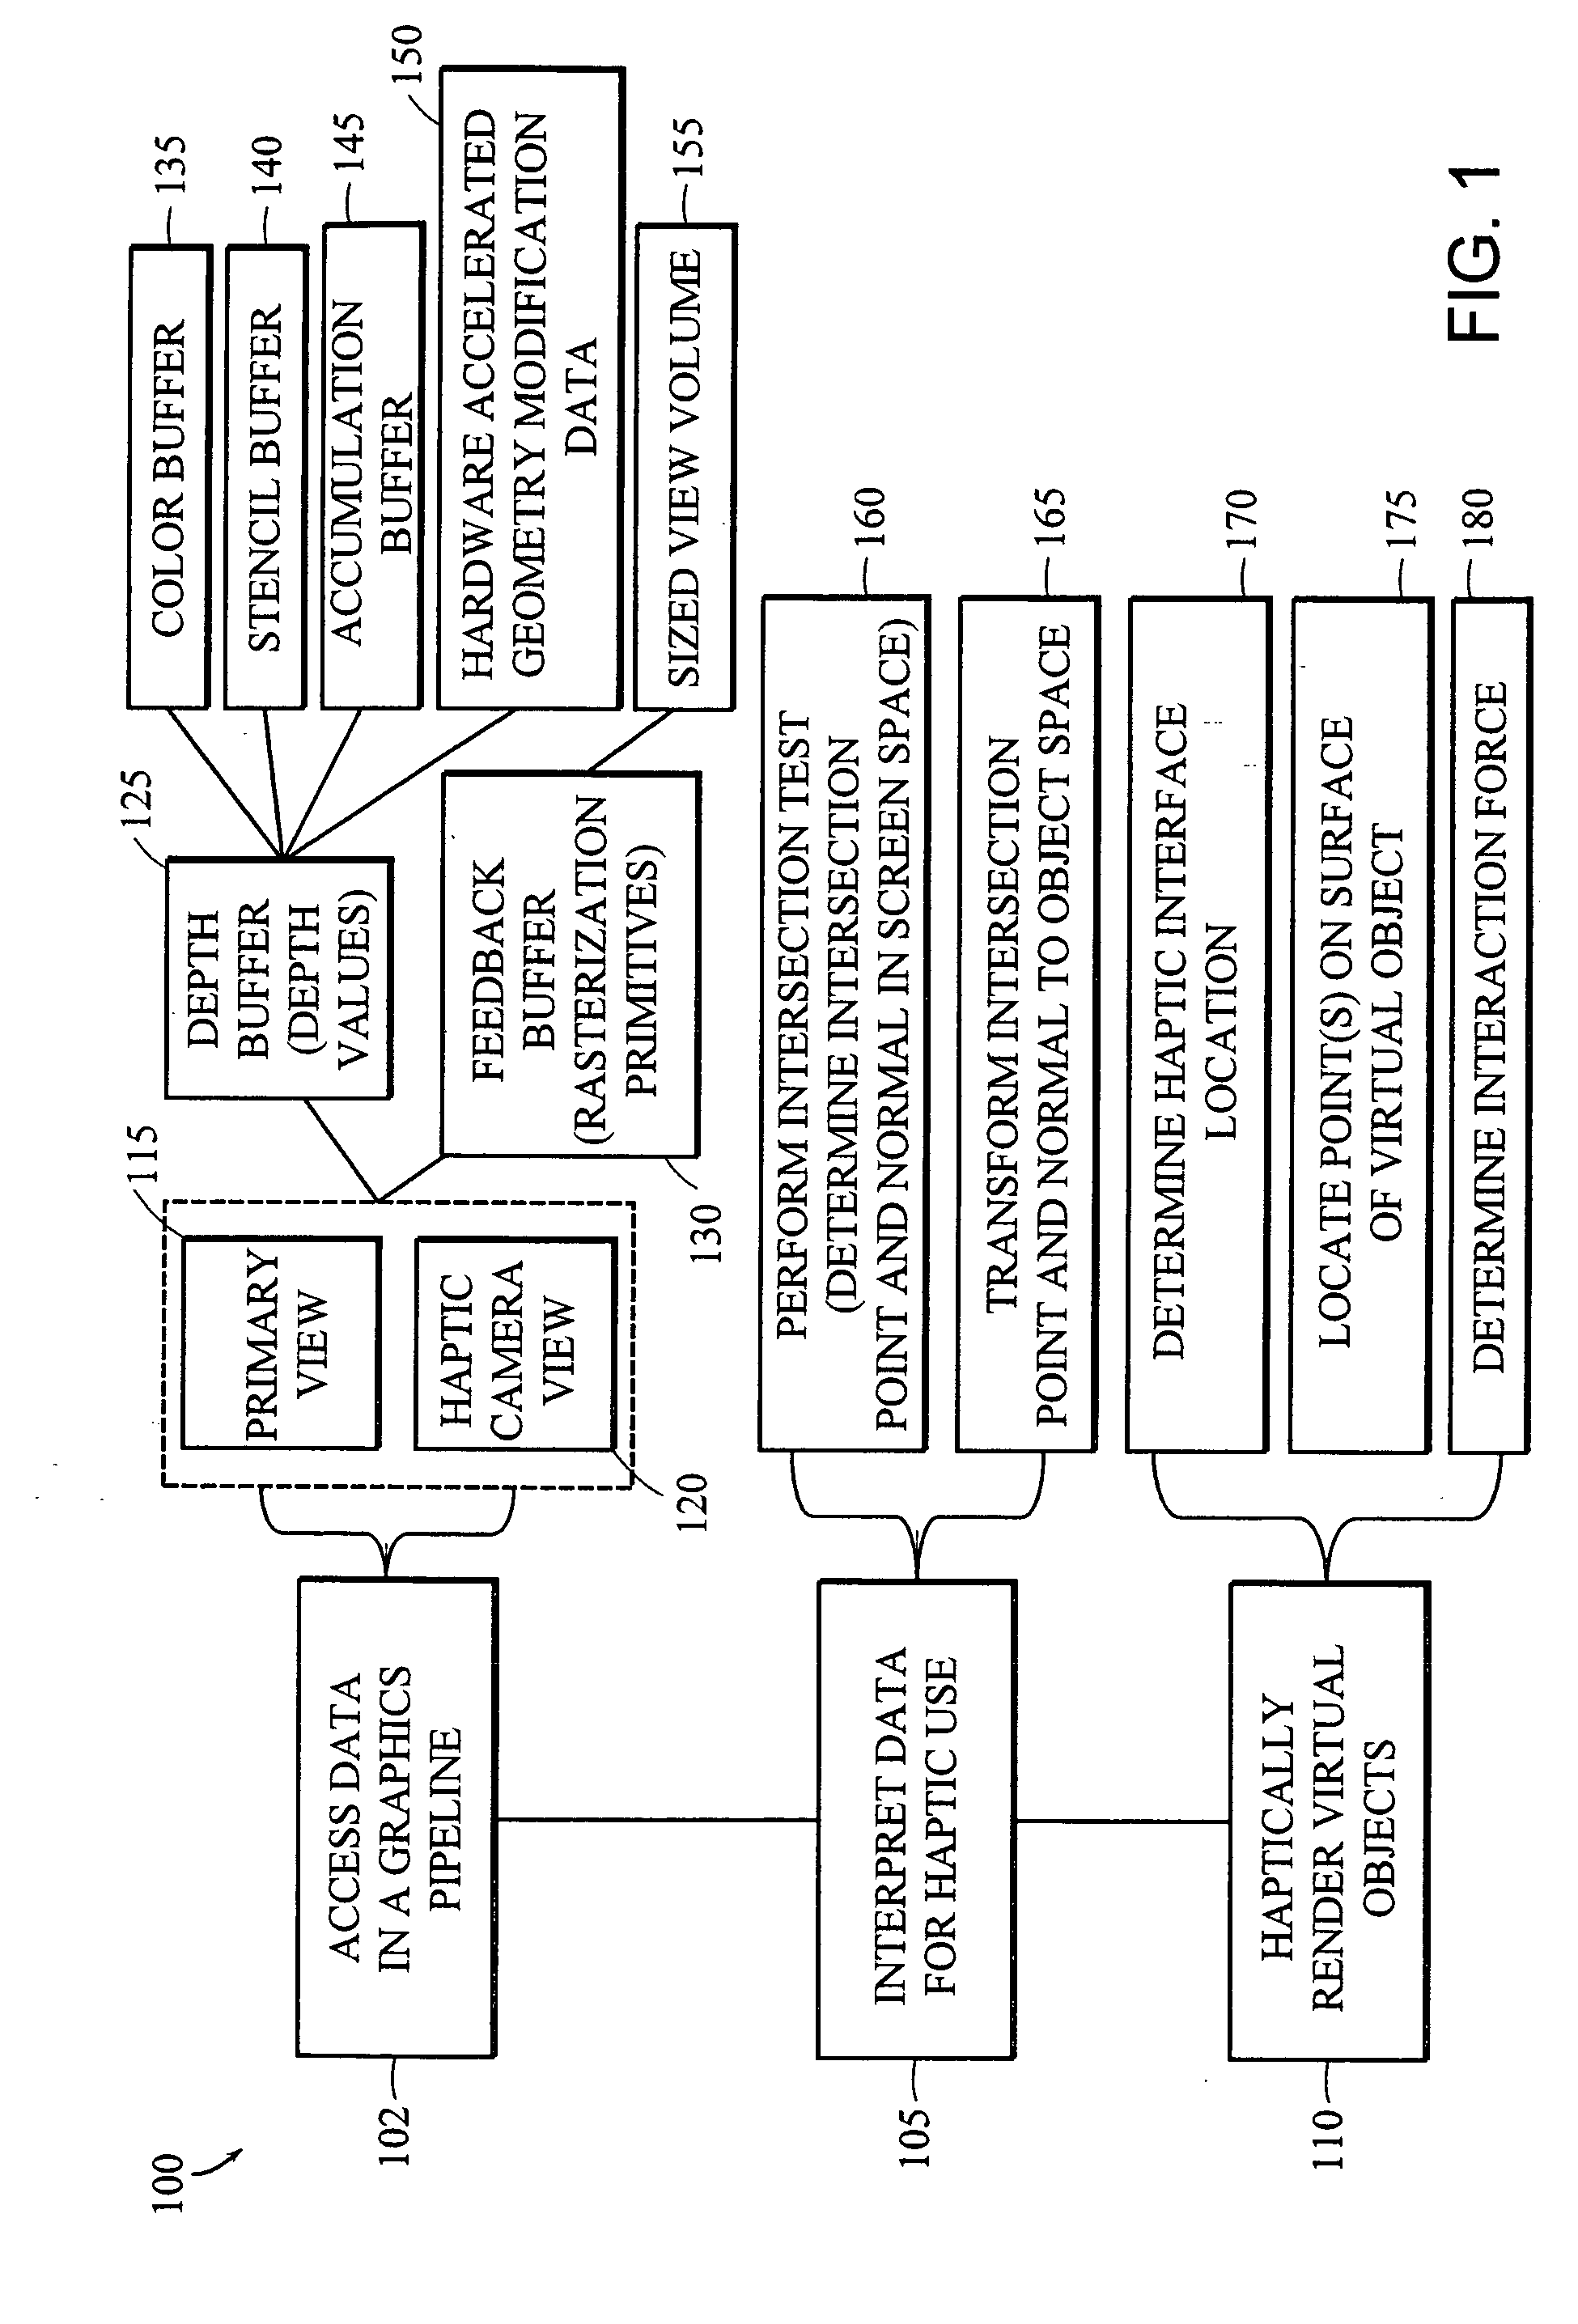 Apparatus and methods for haptic rendering using data in a graphics pipeline